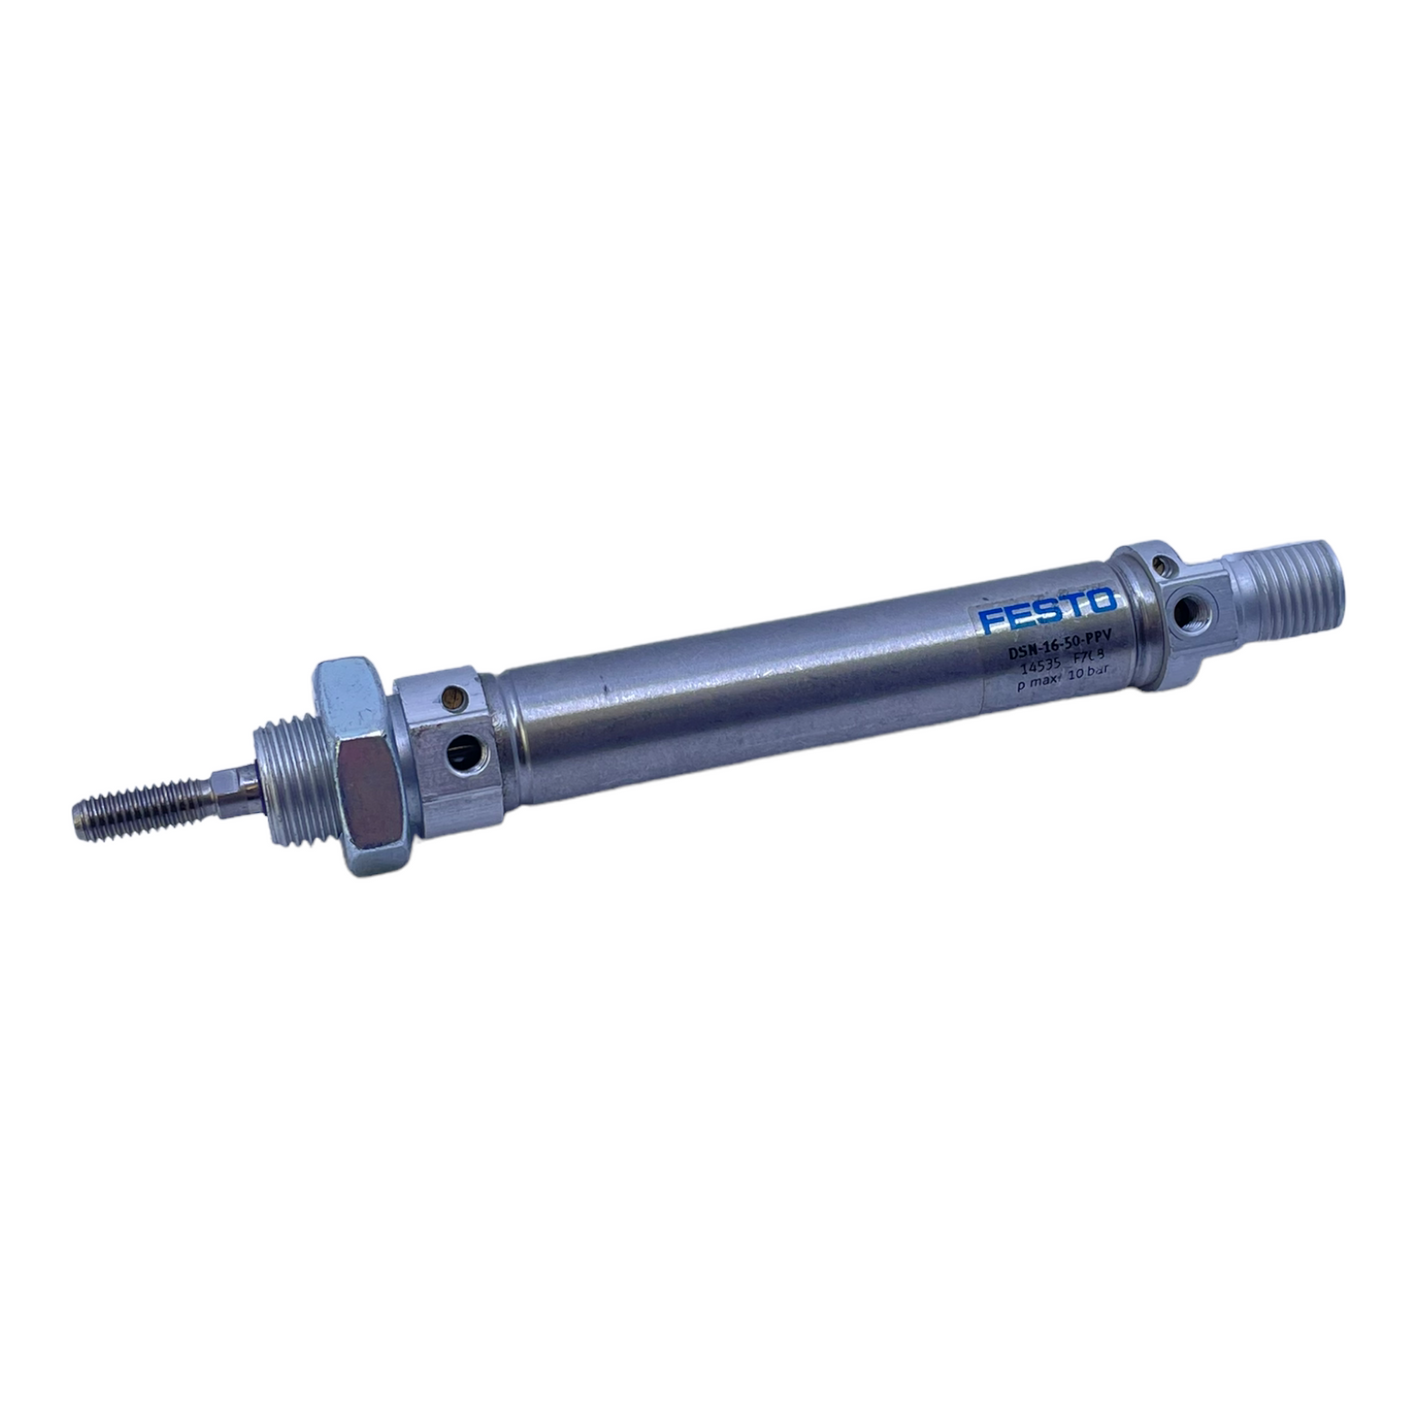 Festo DSN-16-50-PPV pneumatic cylinder 14535 10bar for industrial use 1453